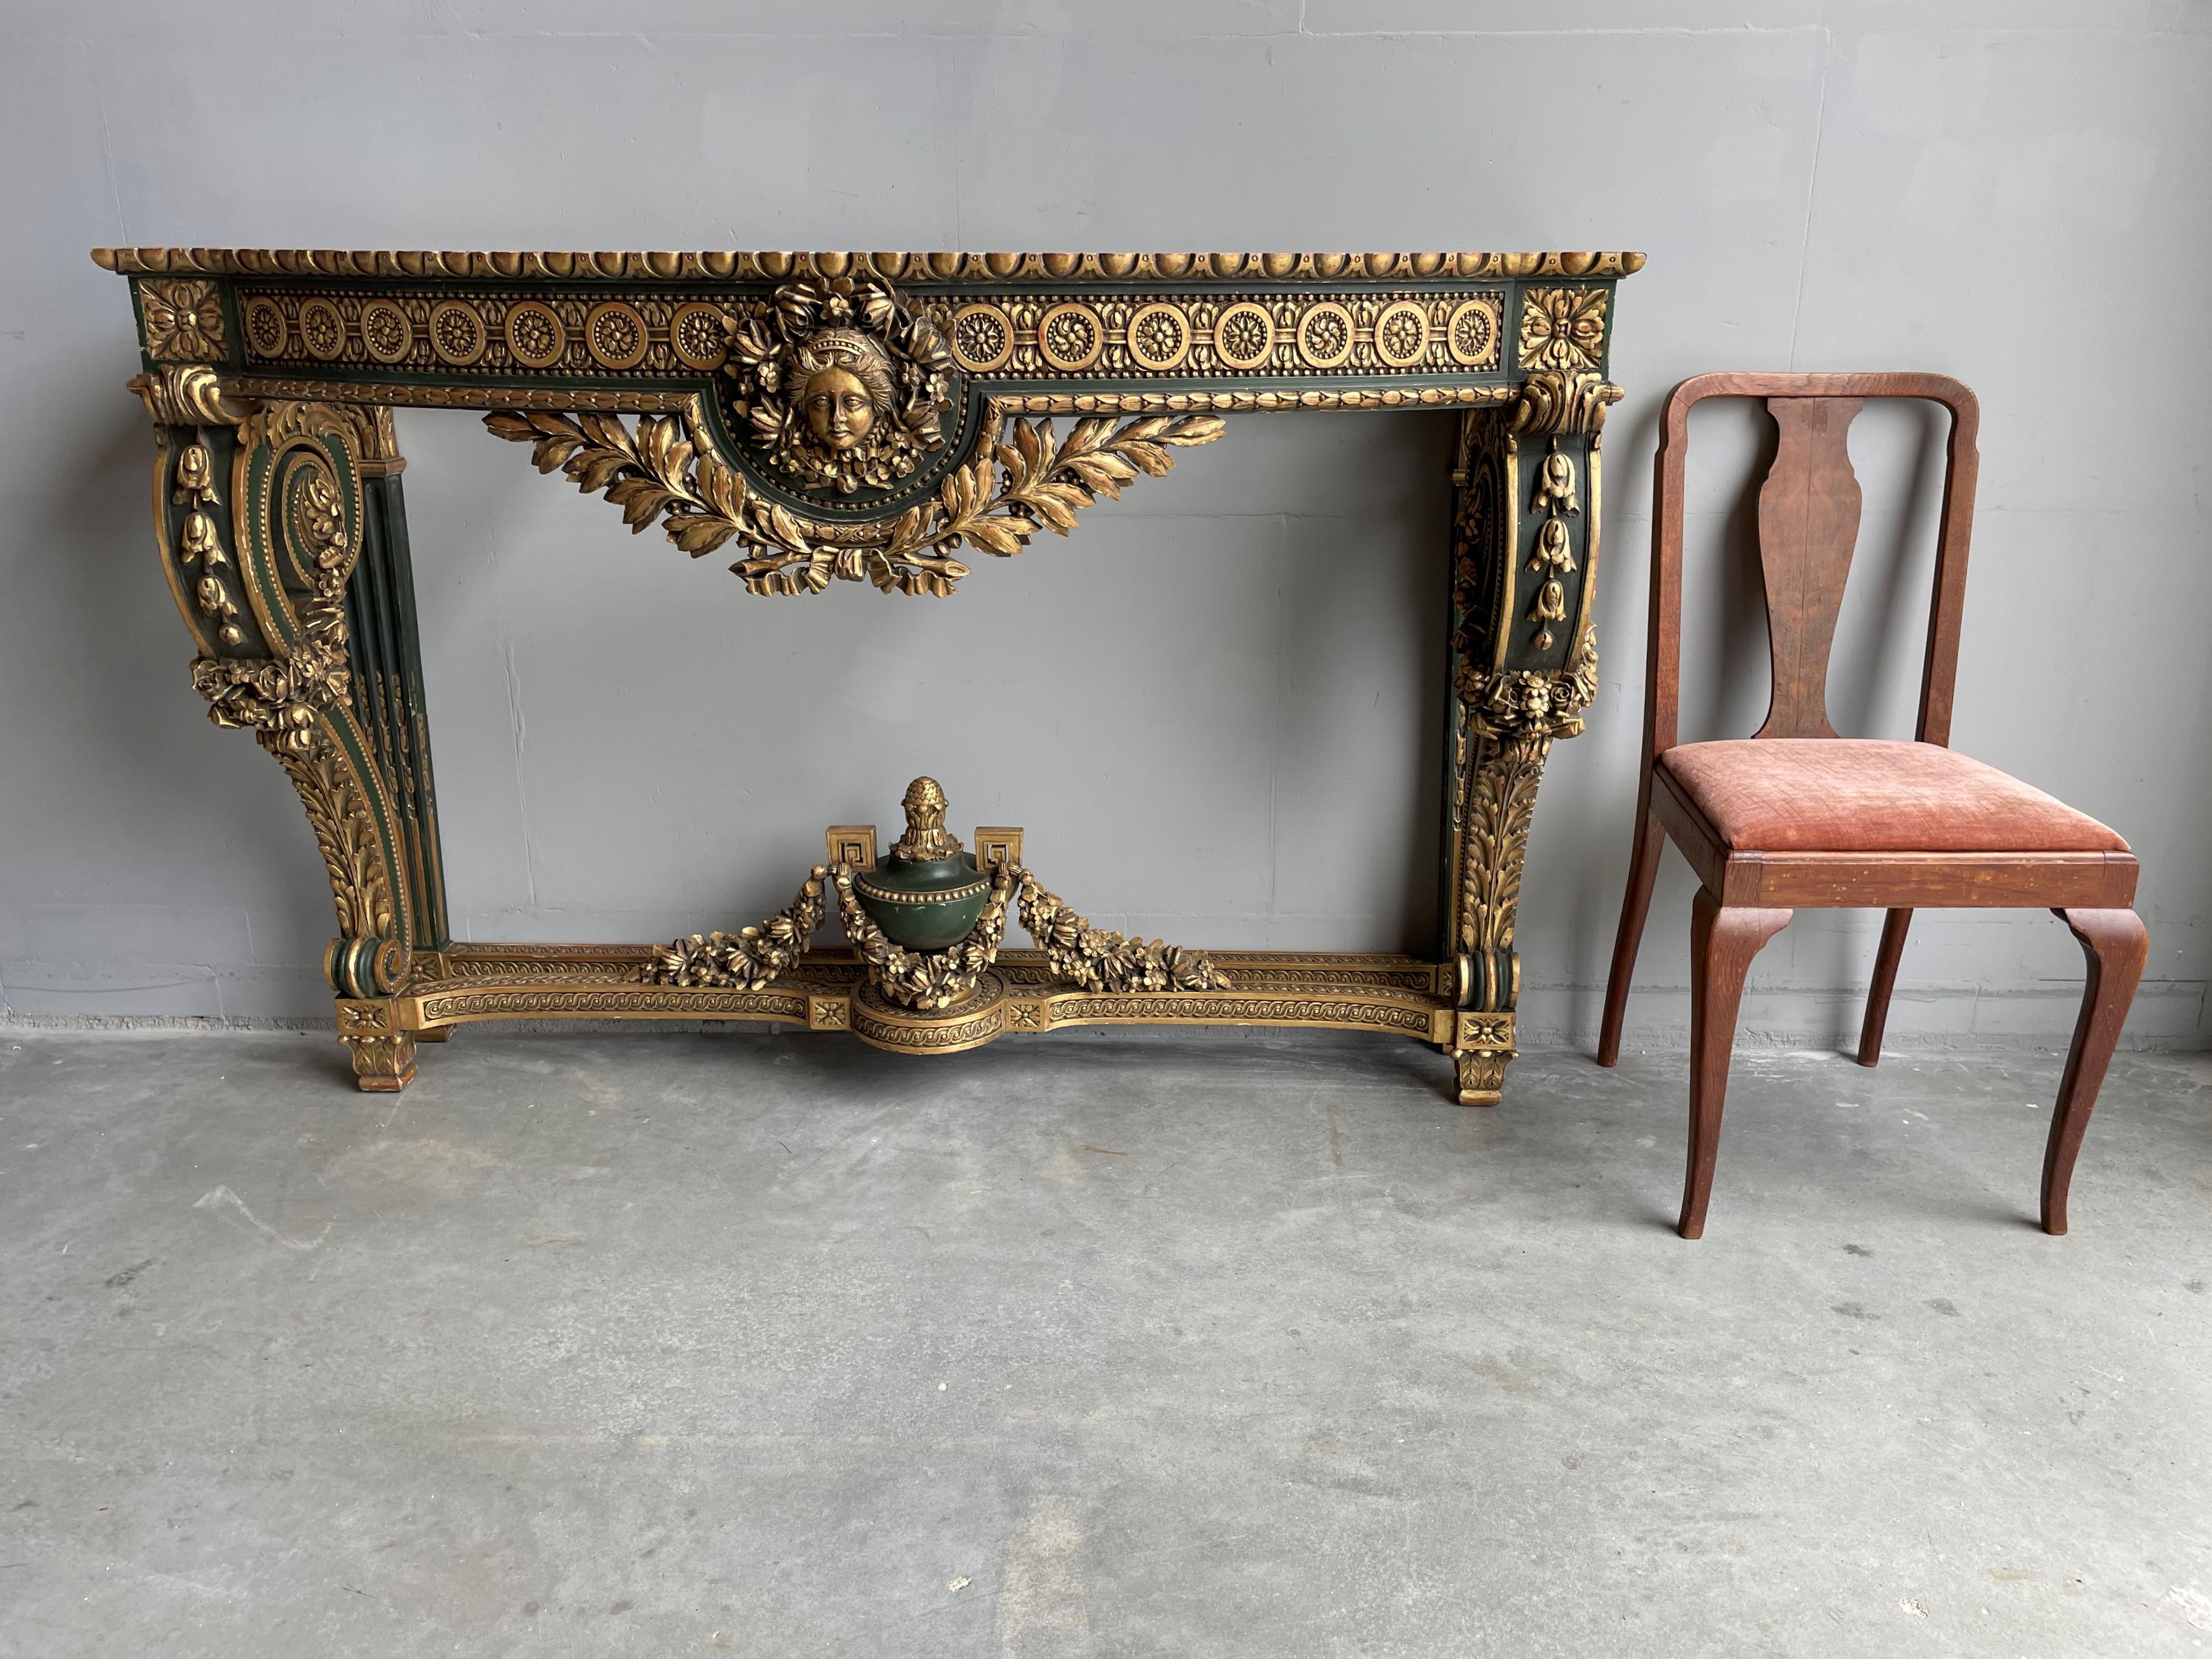 20th Century Large Antique Wooden Side Table w. Amazing Gilt Carvings & Marie Antoinette Mask For Sale